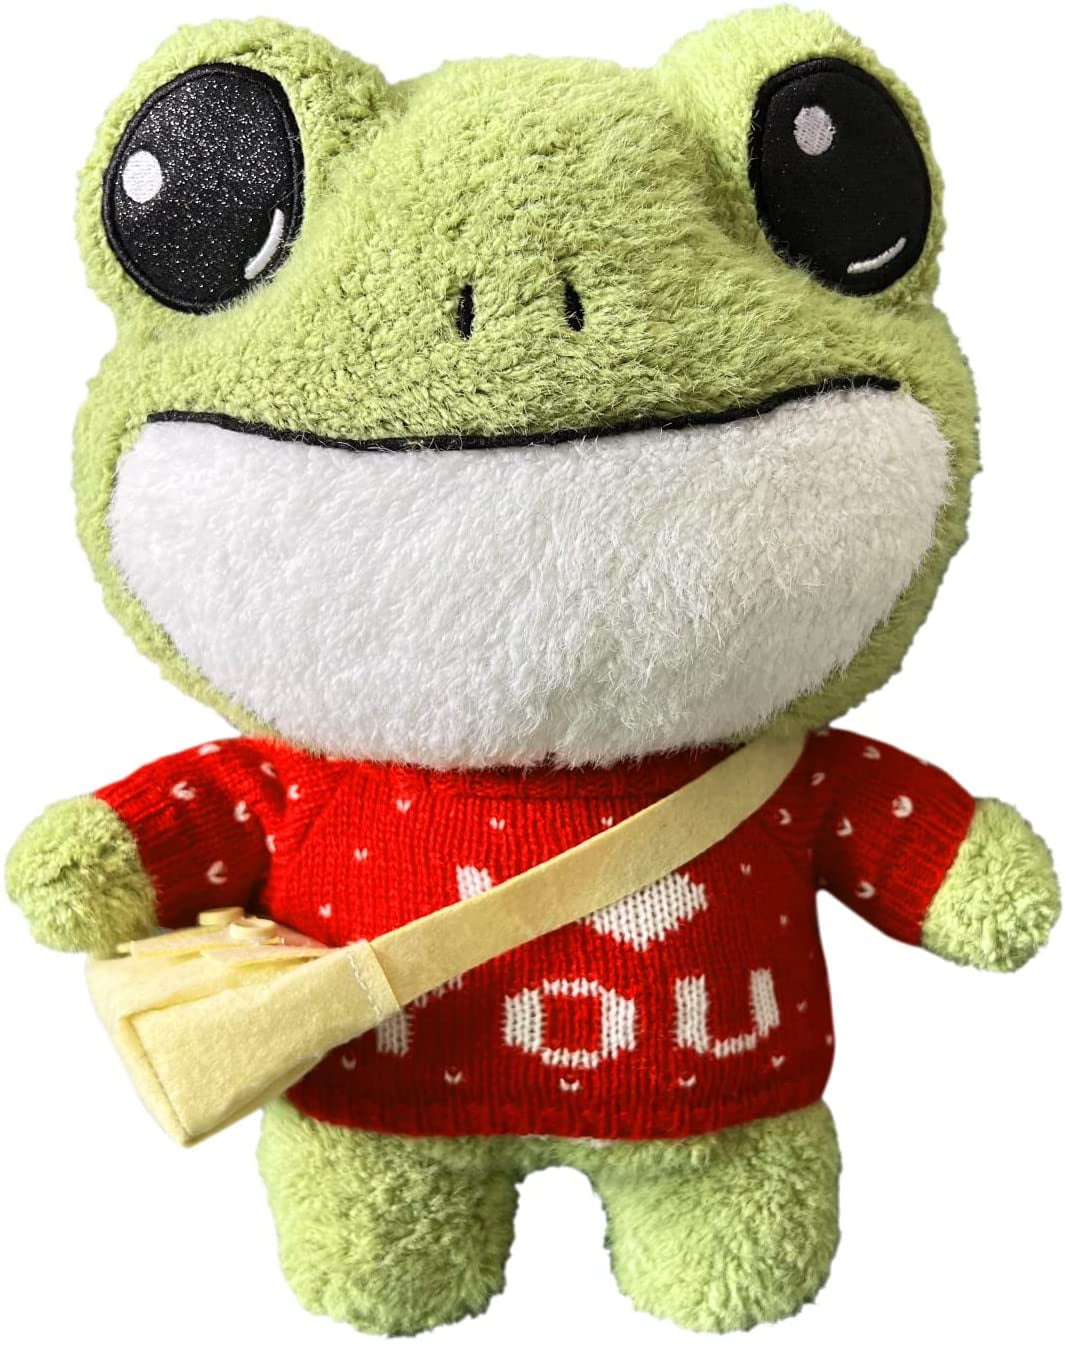 KIRIGAMI Frog Plush, 11.8-inch Frog Stuffed Animal Toy, Soft Cute Variety  Cartoon Green Frog Plushie with Cloths and Bag, Standing Stuffed Frog Gift